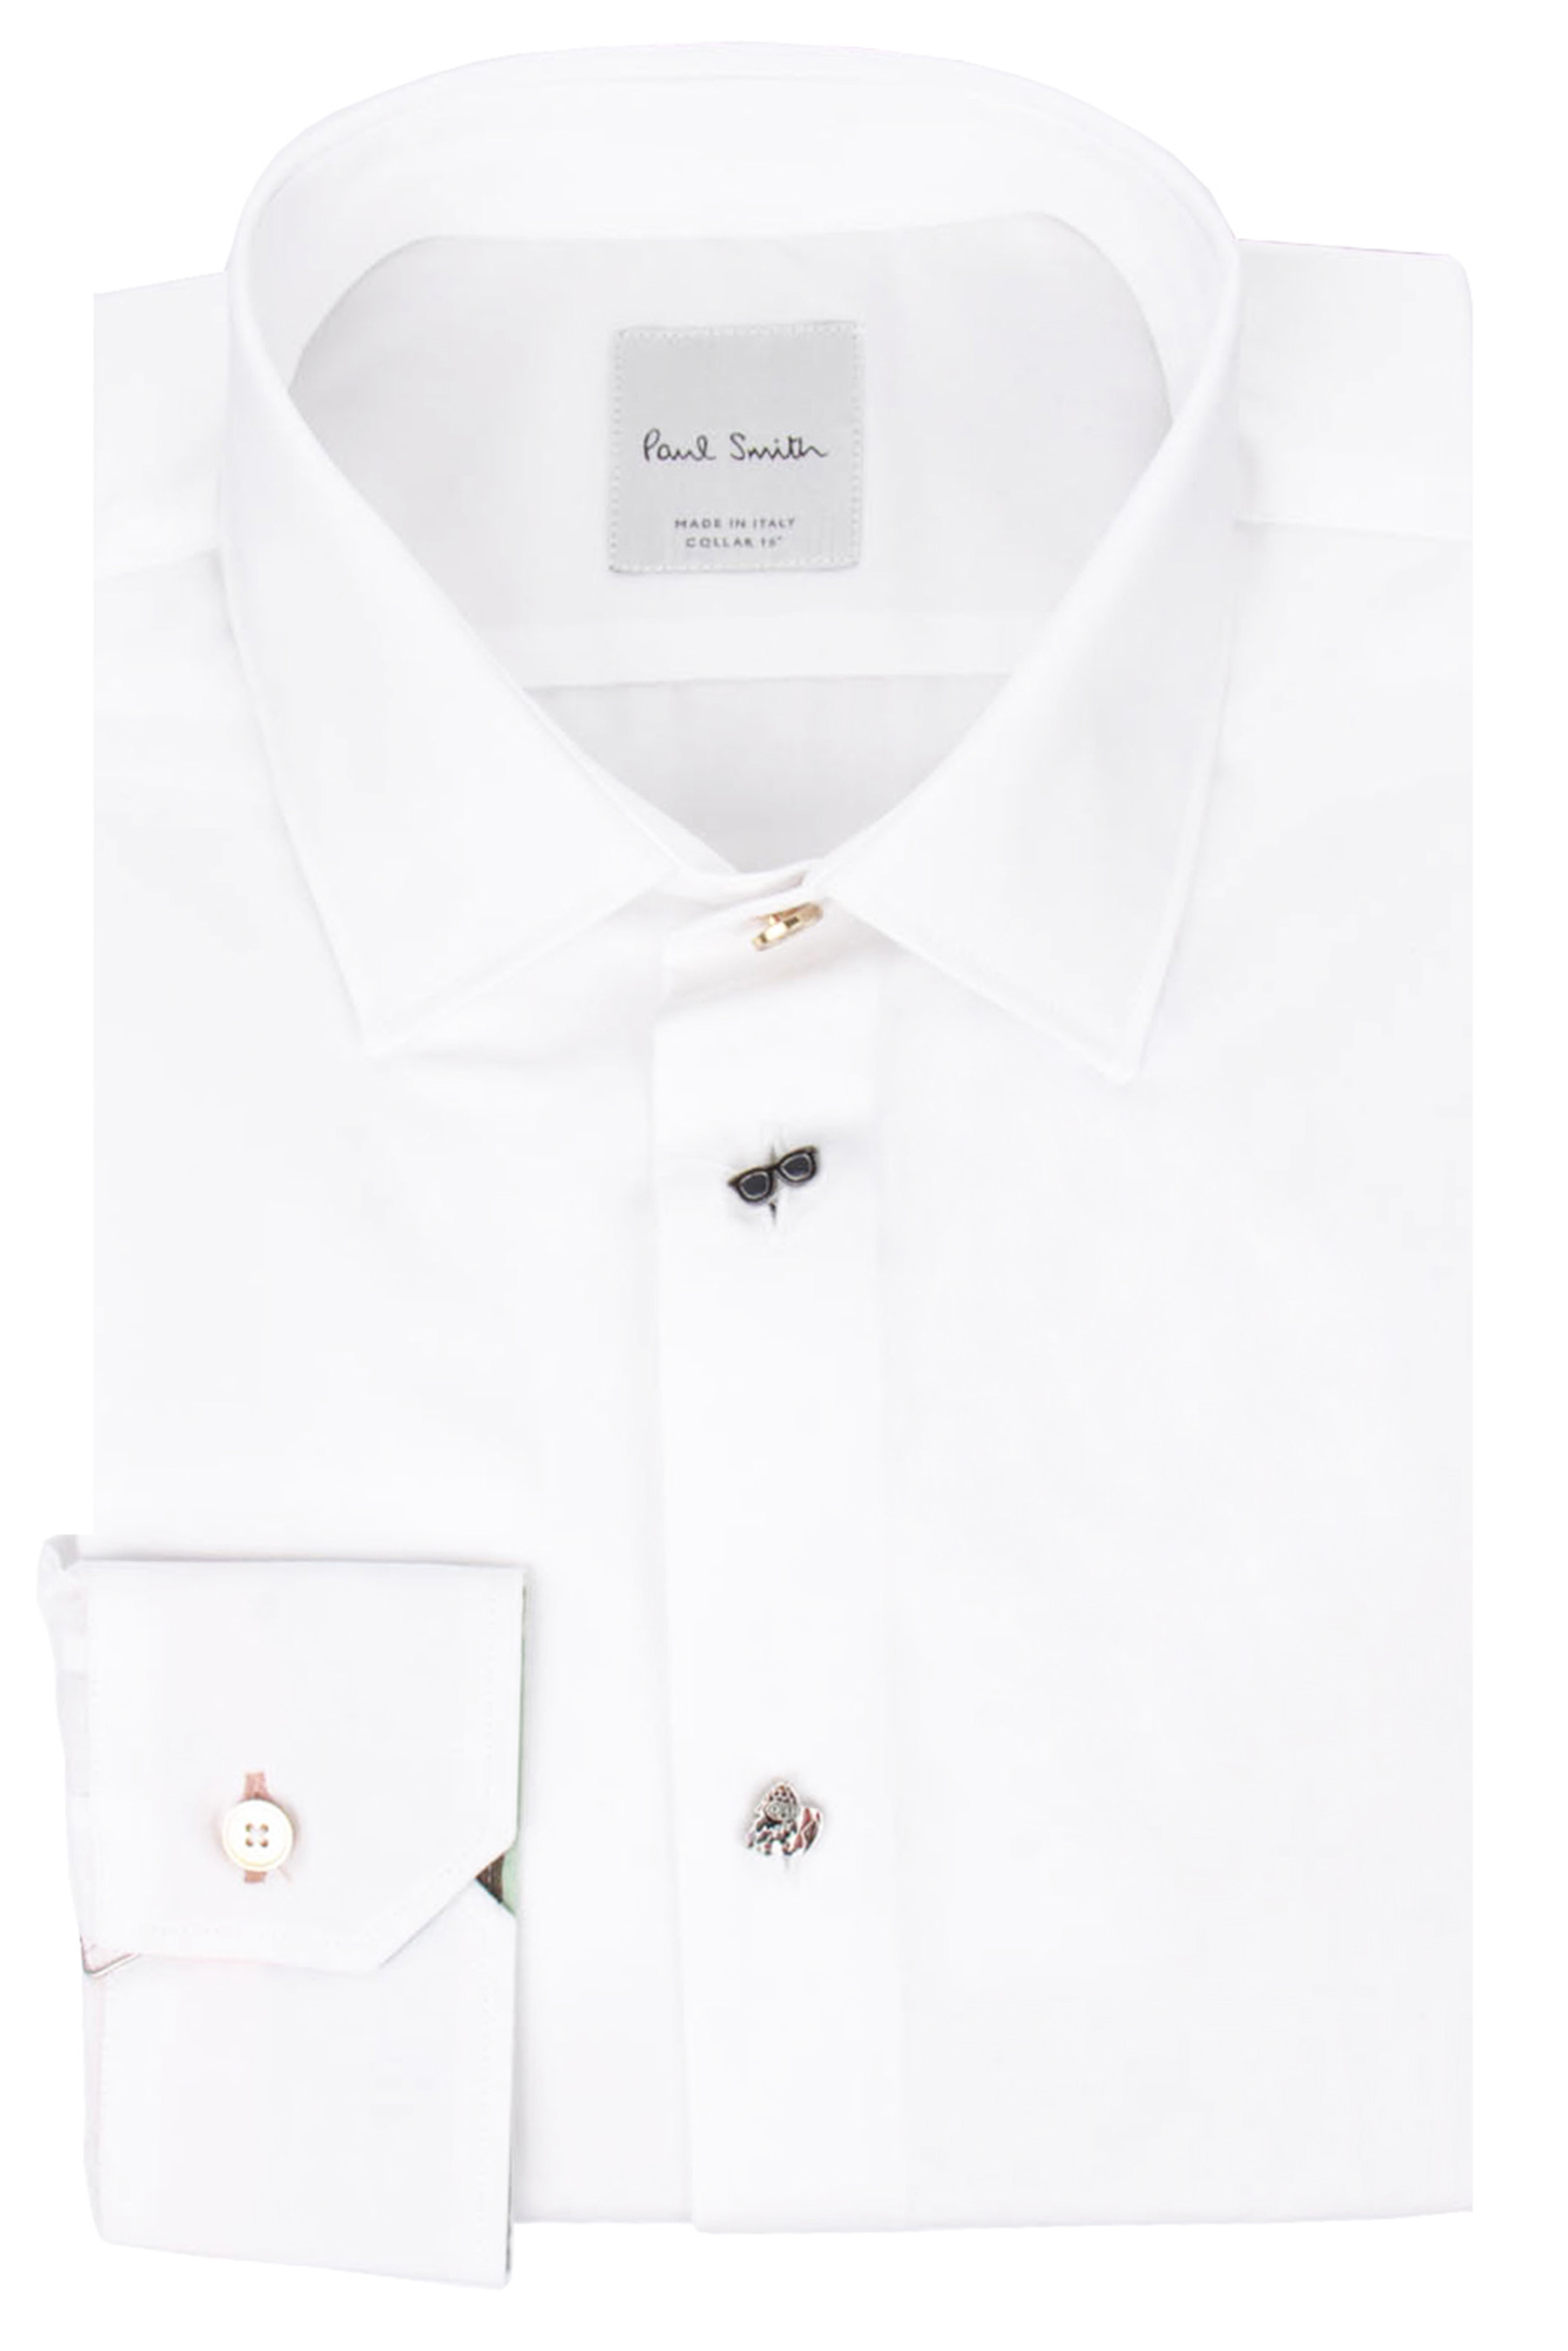 PAUL SMITH for MIB Cotton Shirt Charm Buttons | Casual Shirts